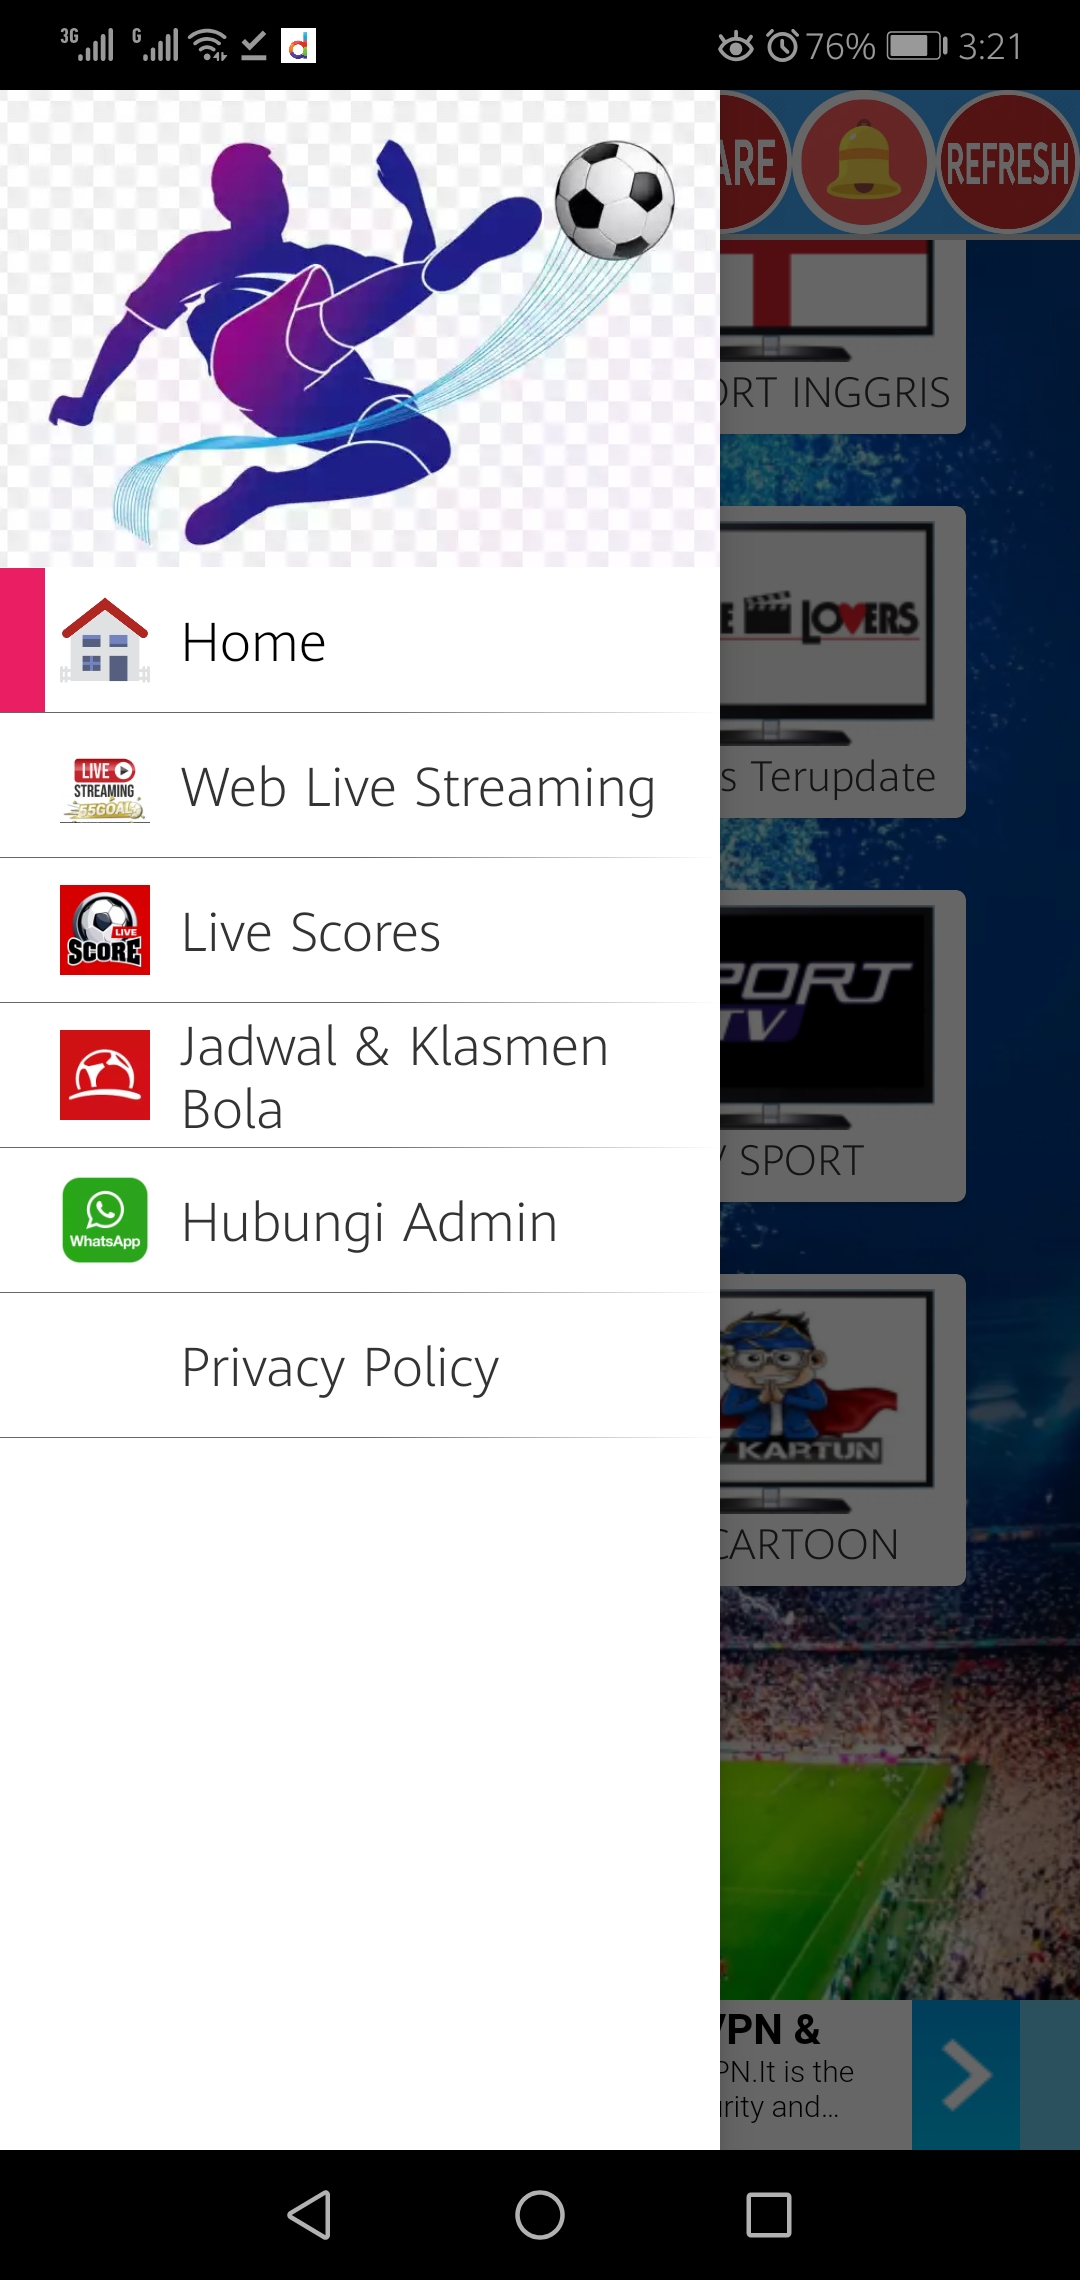 Streming Bola Online : BOLA Broadcast Live Stream - YouTube